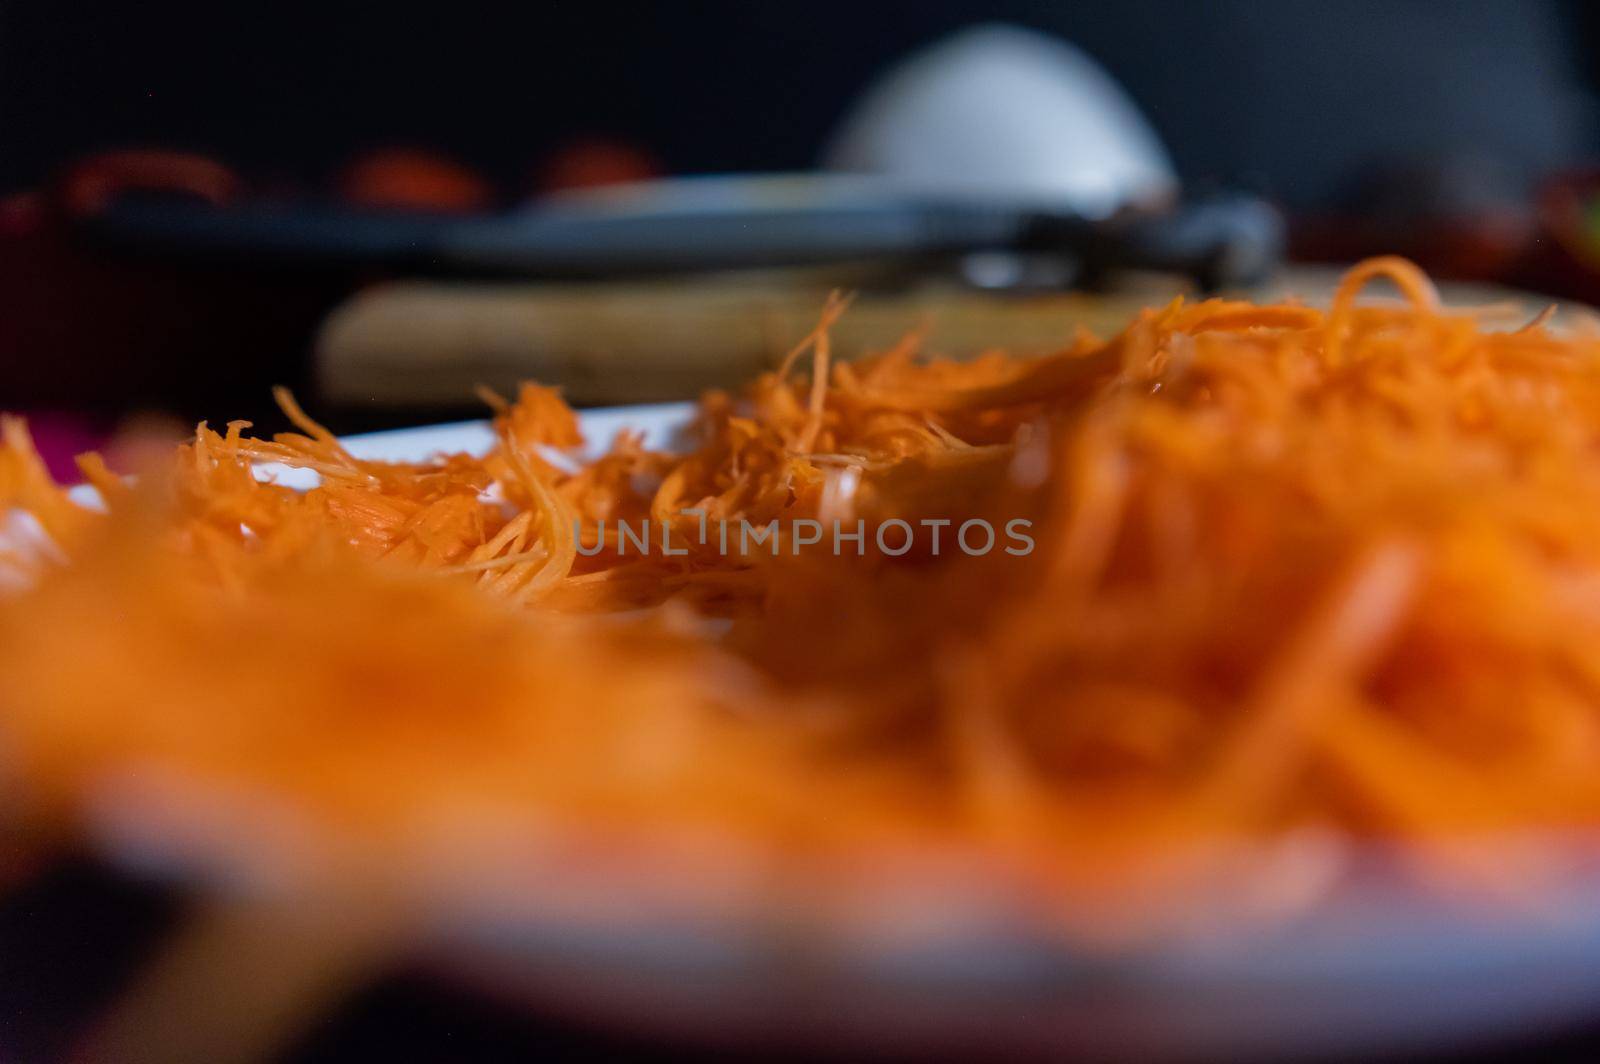 Extreme close-up of small pile of grated carrot on white plate with blurry background. Tasty and fresh shredded carrot above porcelain plate. Vegetables and healthy food preparation